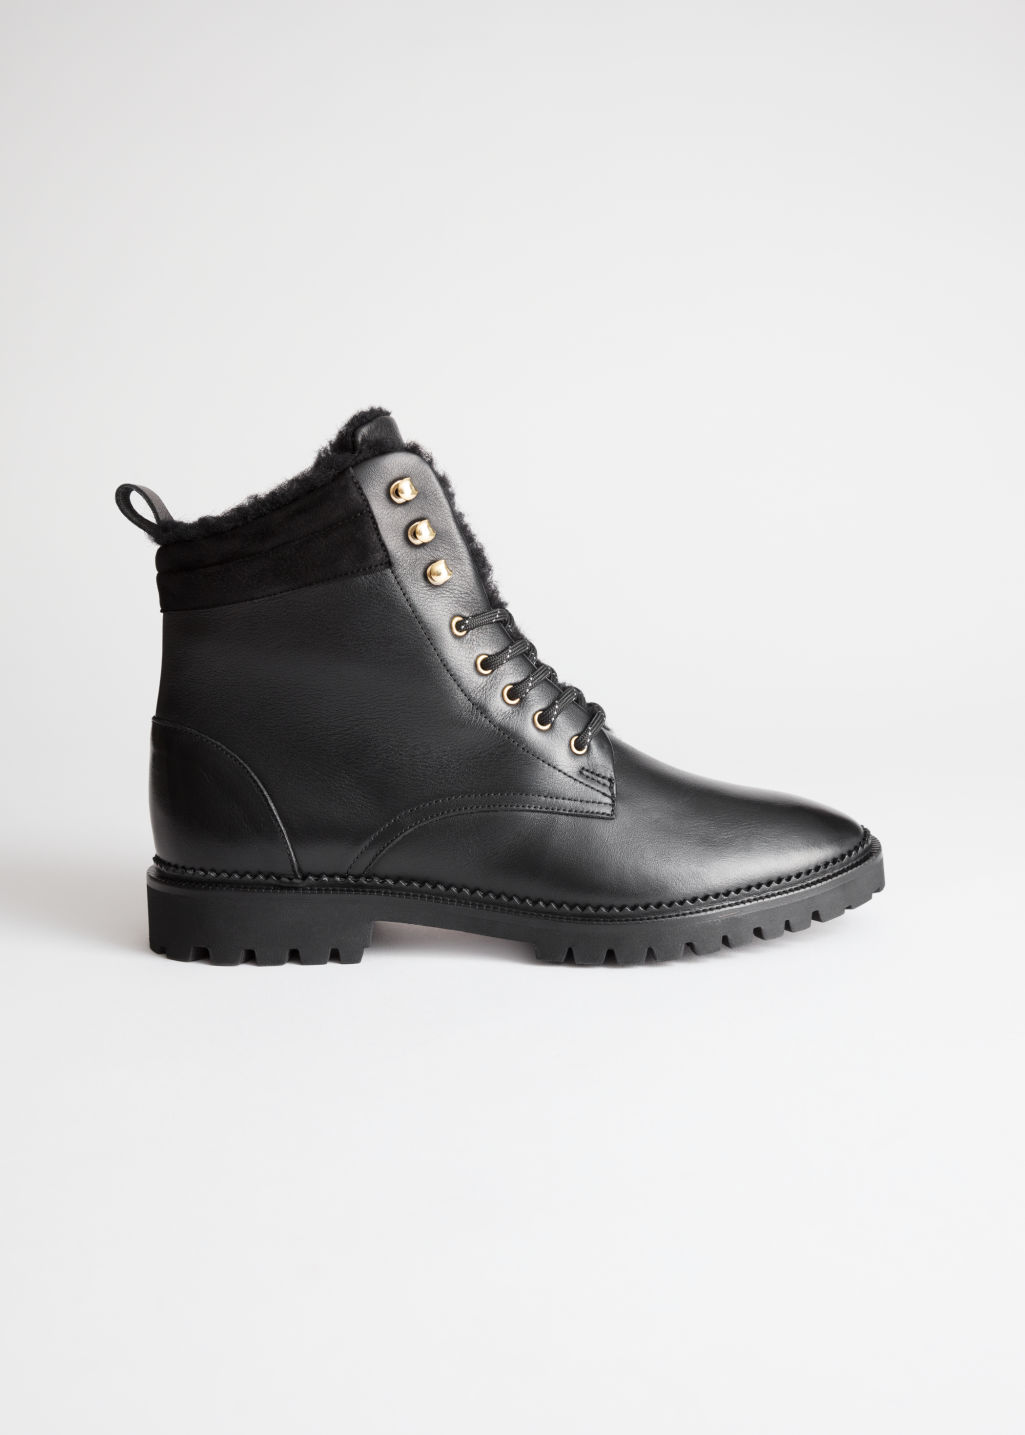 Leather Lace Up Snow Boots - Black - Ankleboots - & Other Stories